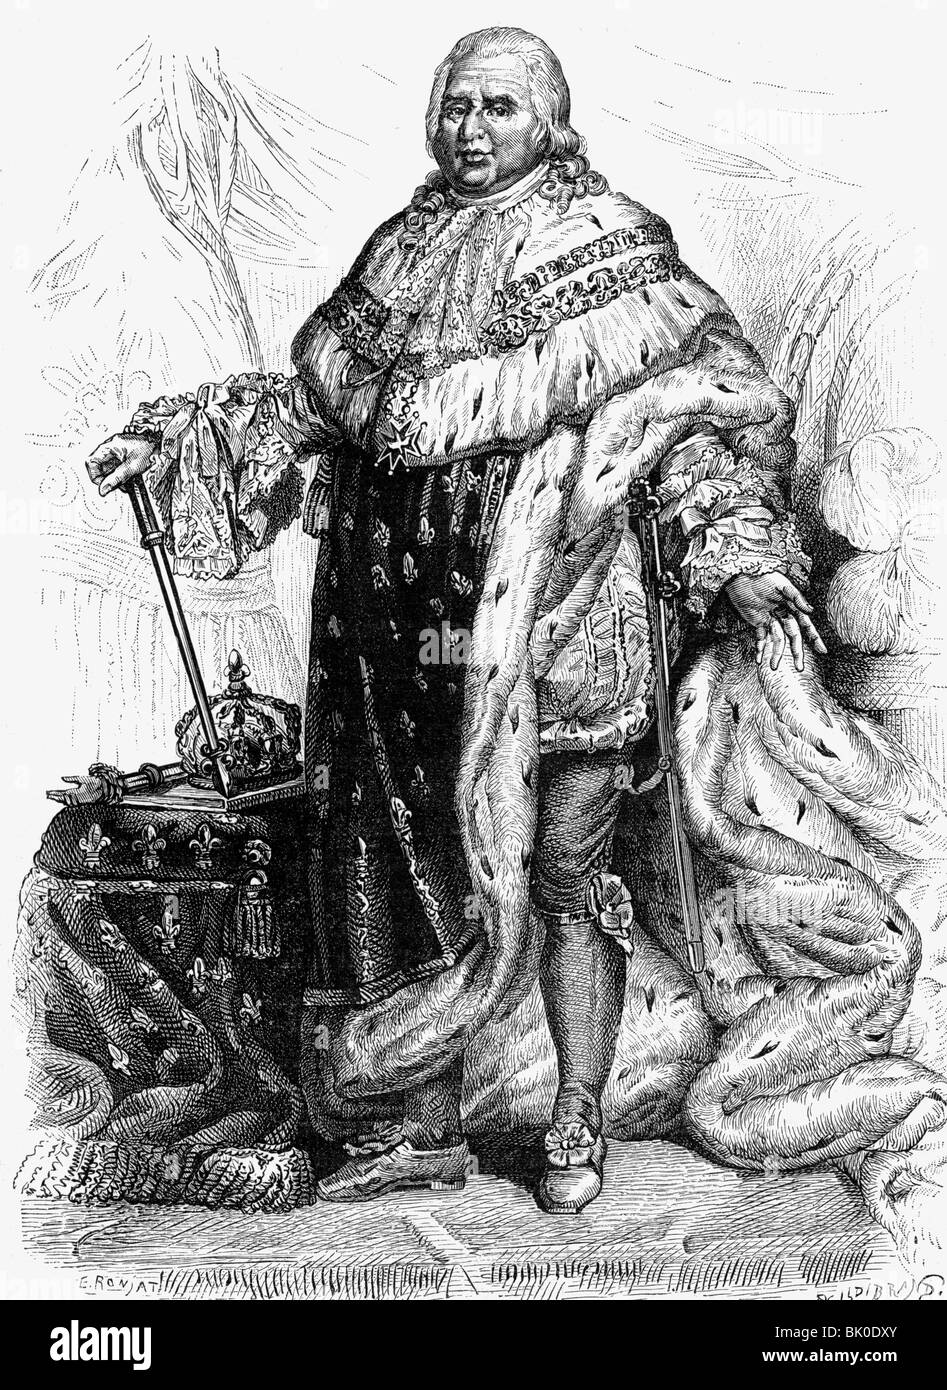 Louis XVIII, 17.11.1755 - 16.9.1824, King of France 2.4.1814 - 16.9.1824, full length in coronation regalia, wood engraving after painting by Guerin, 1815, , Artist's Copyright has not to be cleared Stock Photo